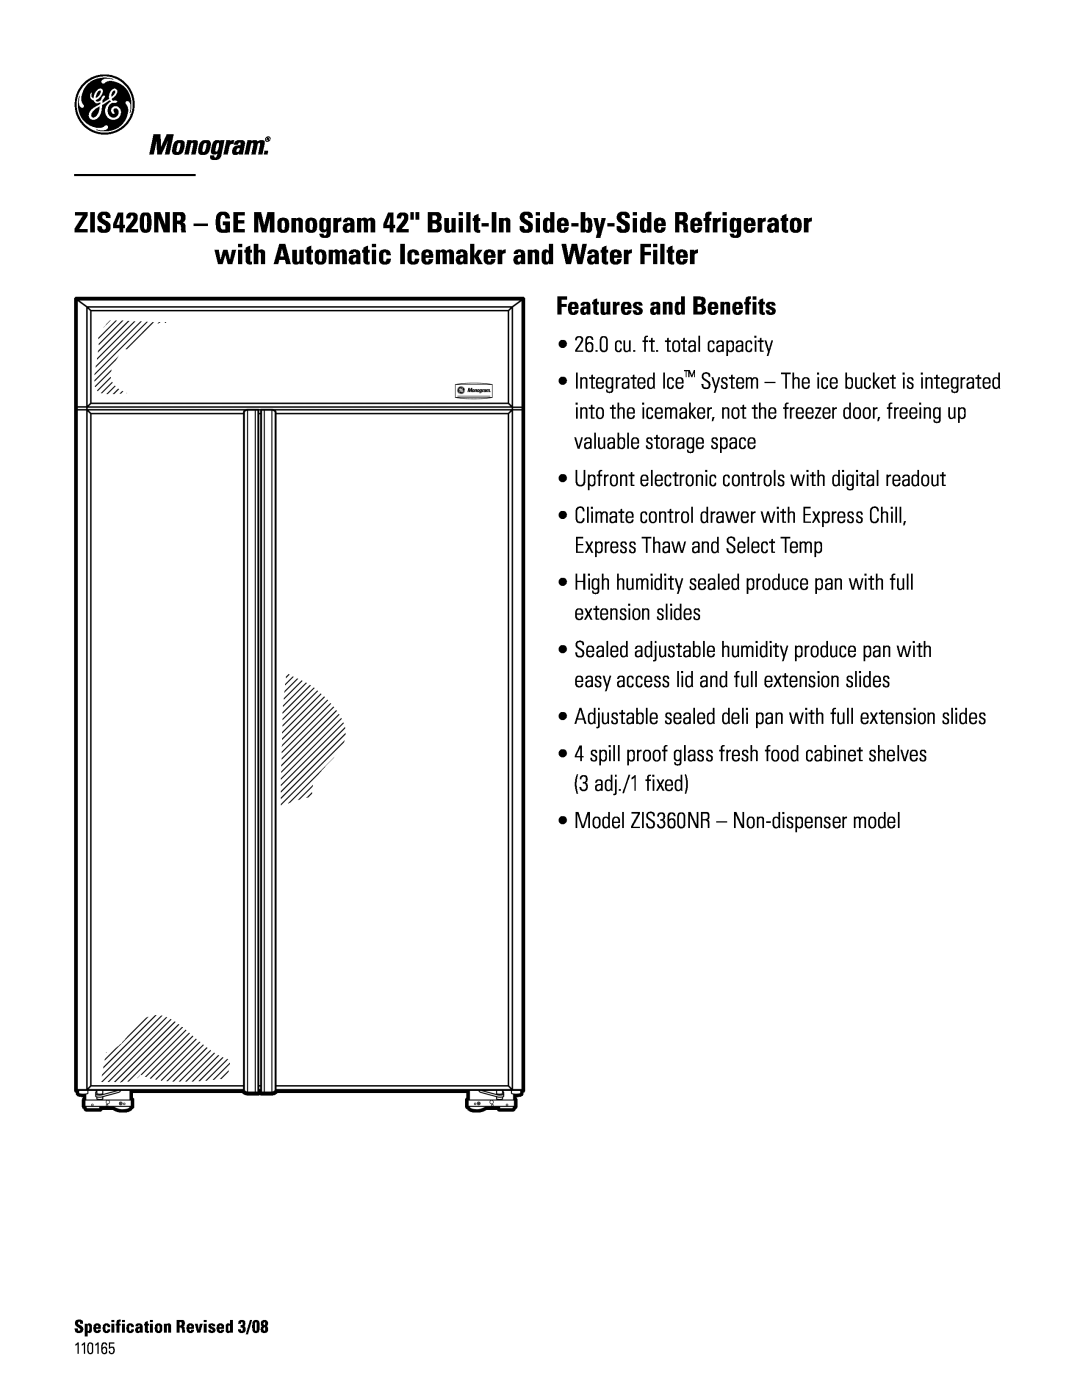 GE Monogram ZIS420NR installation instructions Features and Benefits 